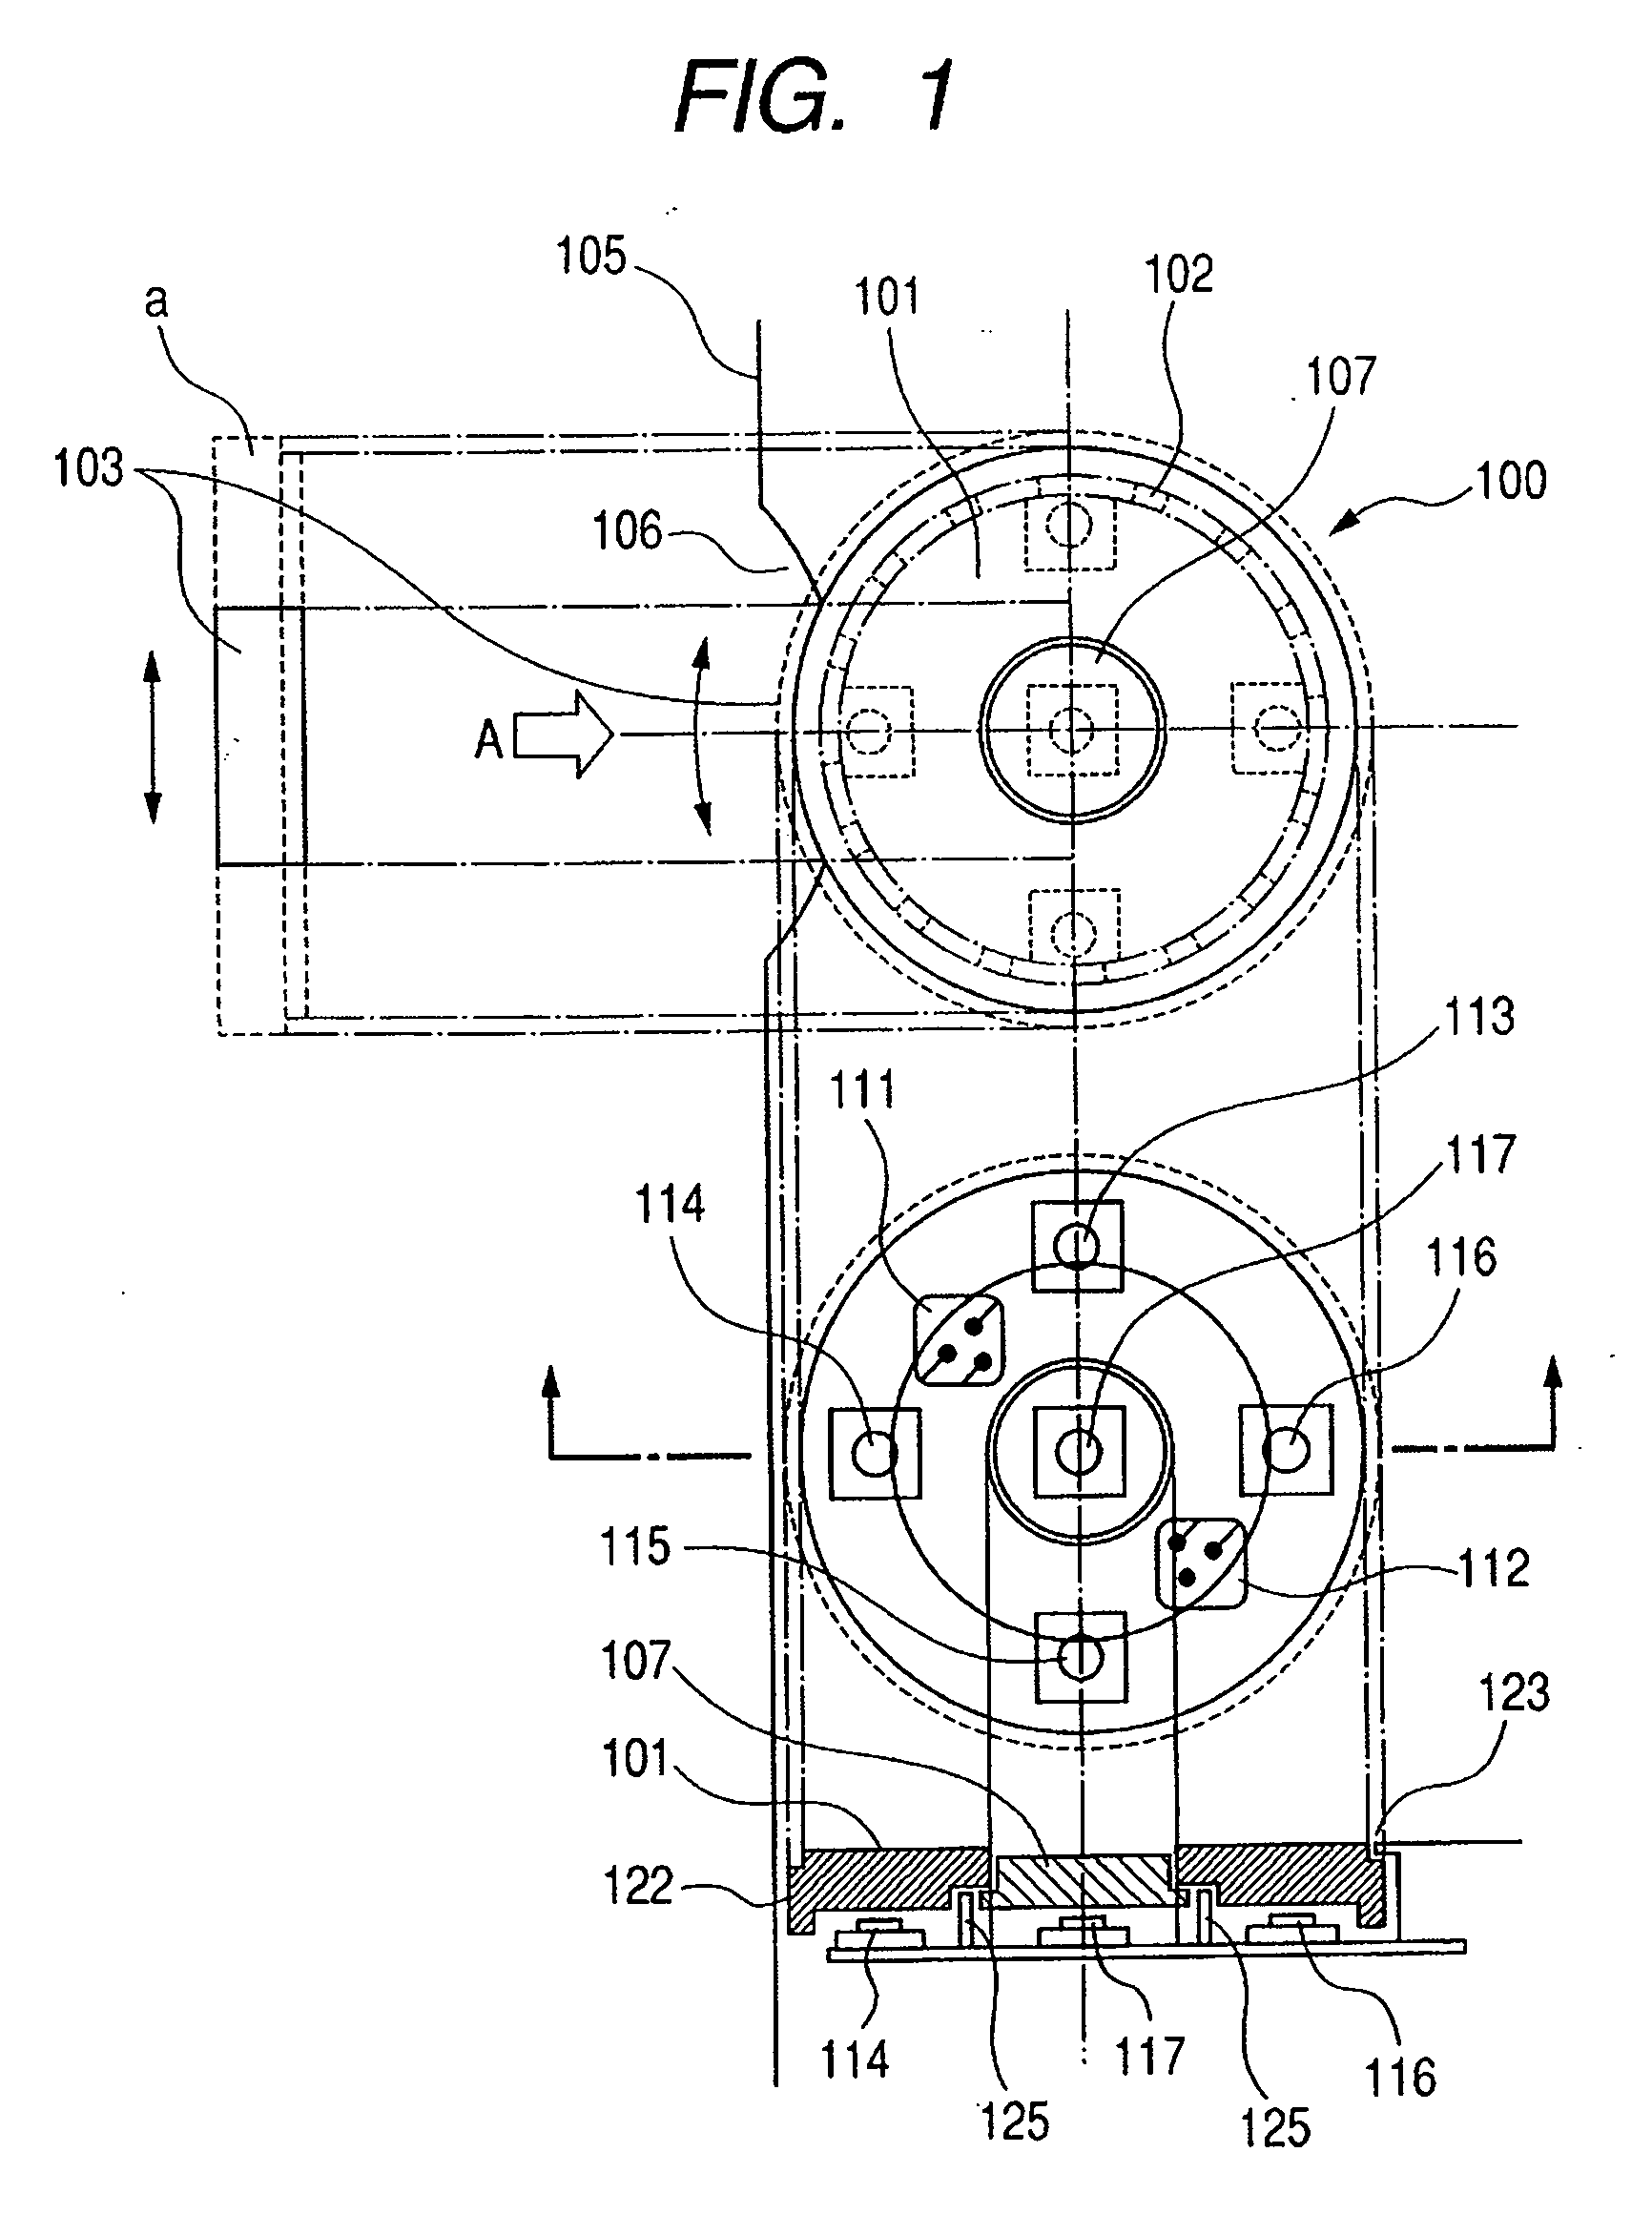 Multi-function input switch and photographing apparatus therewith